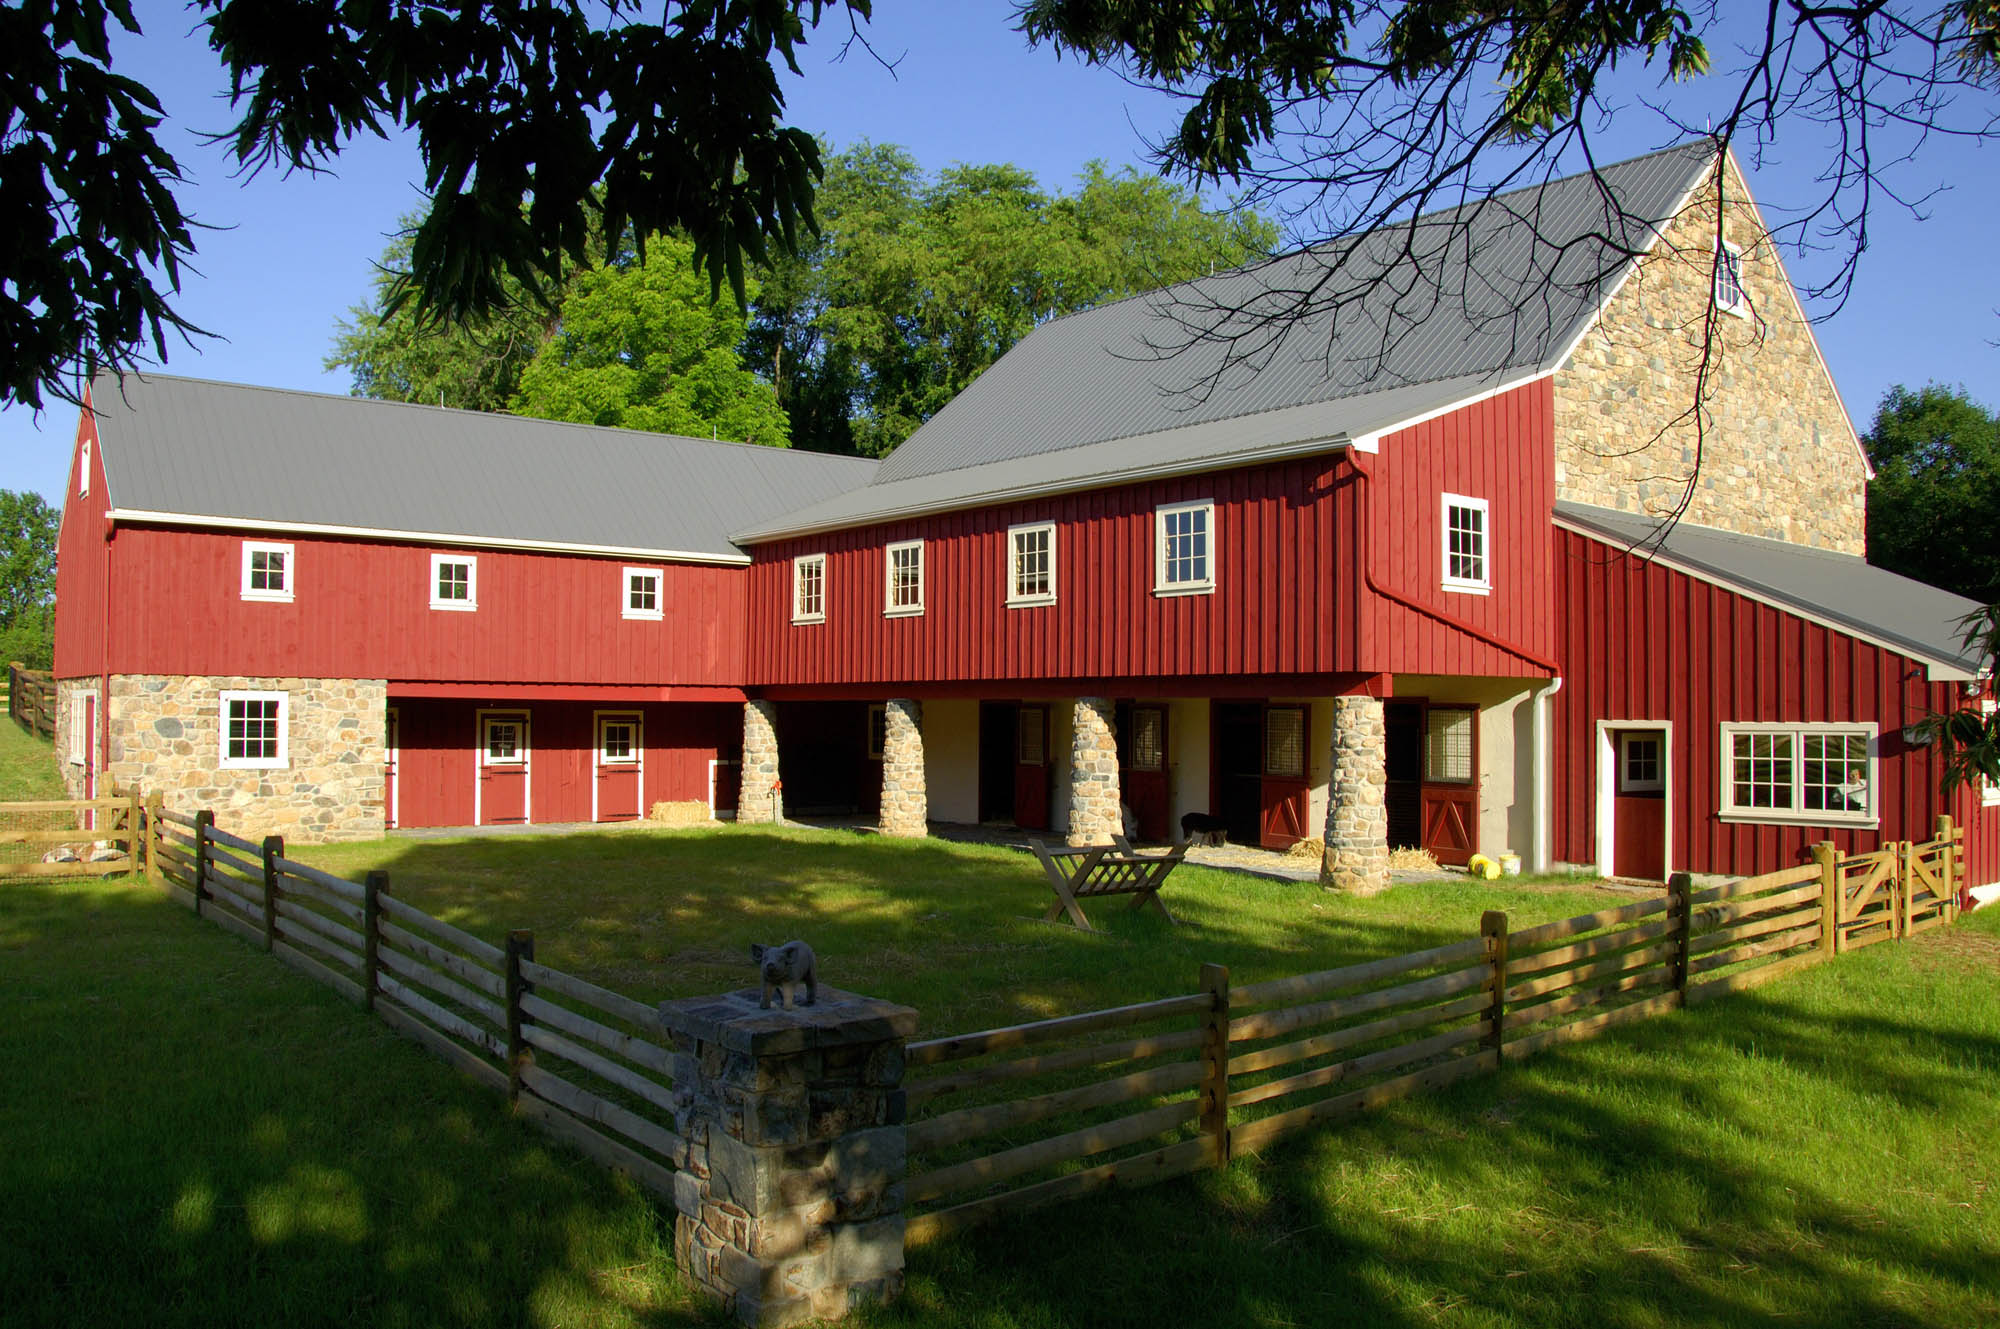 SITED ON A 17-ACRE FARM, this classic Chester County red bank barn was buil...